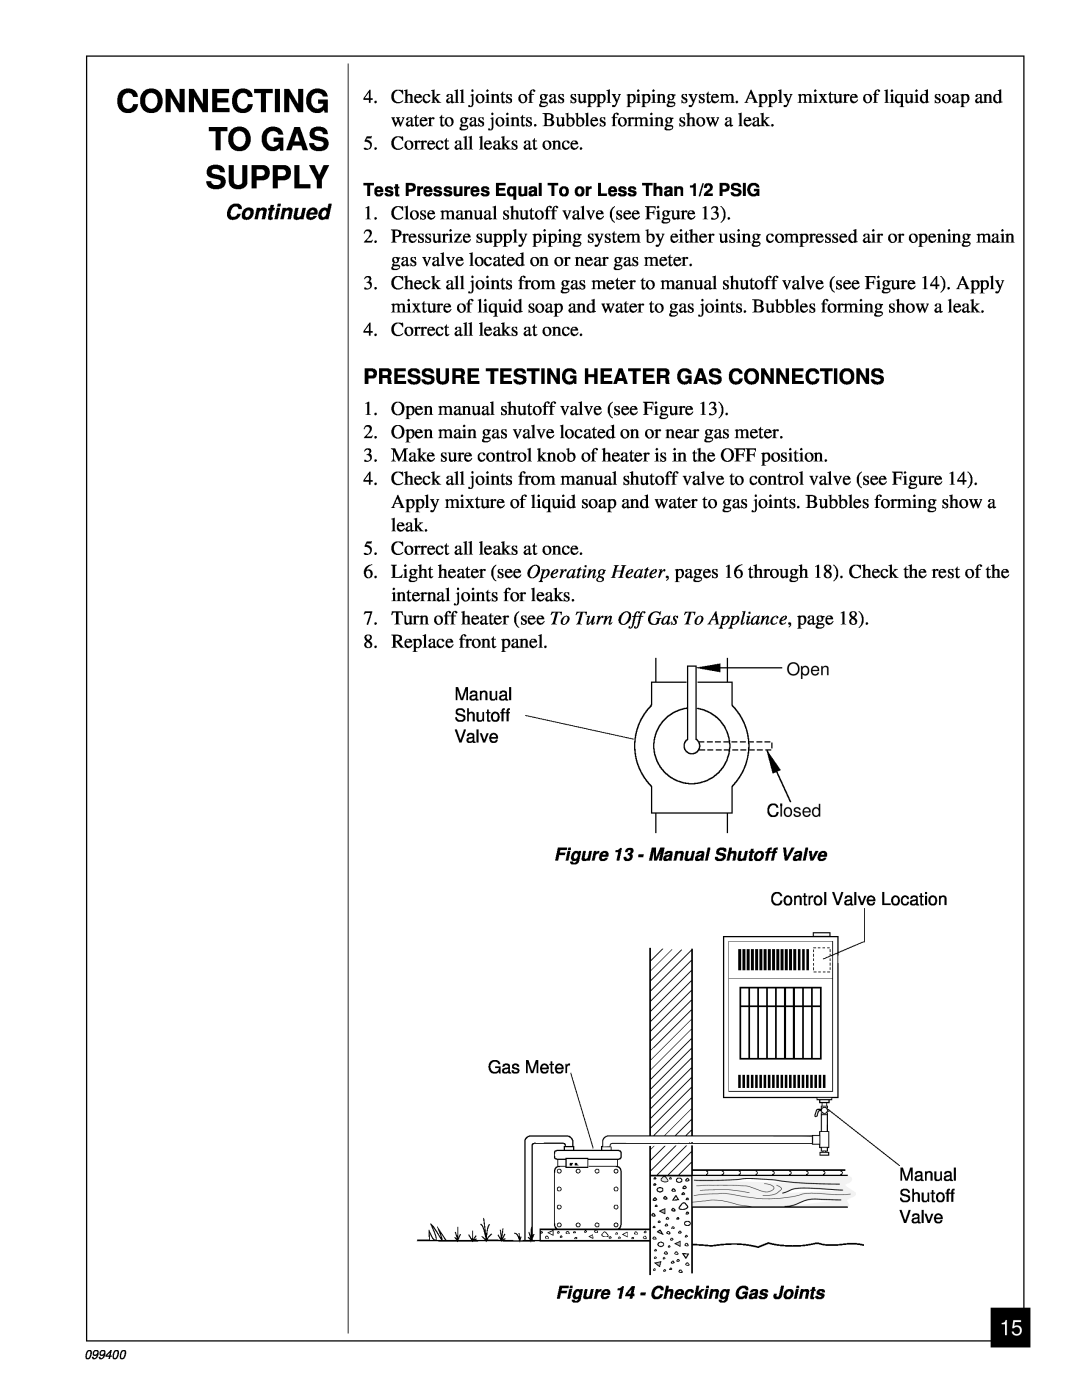 Desa VN1000B installation manual Connecting To Gas Supply, Continued, Pressure Testing Heater Gas Connections 